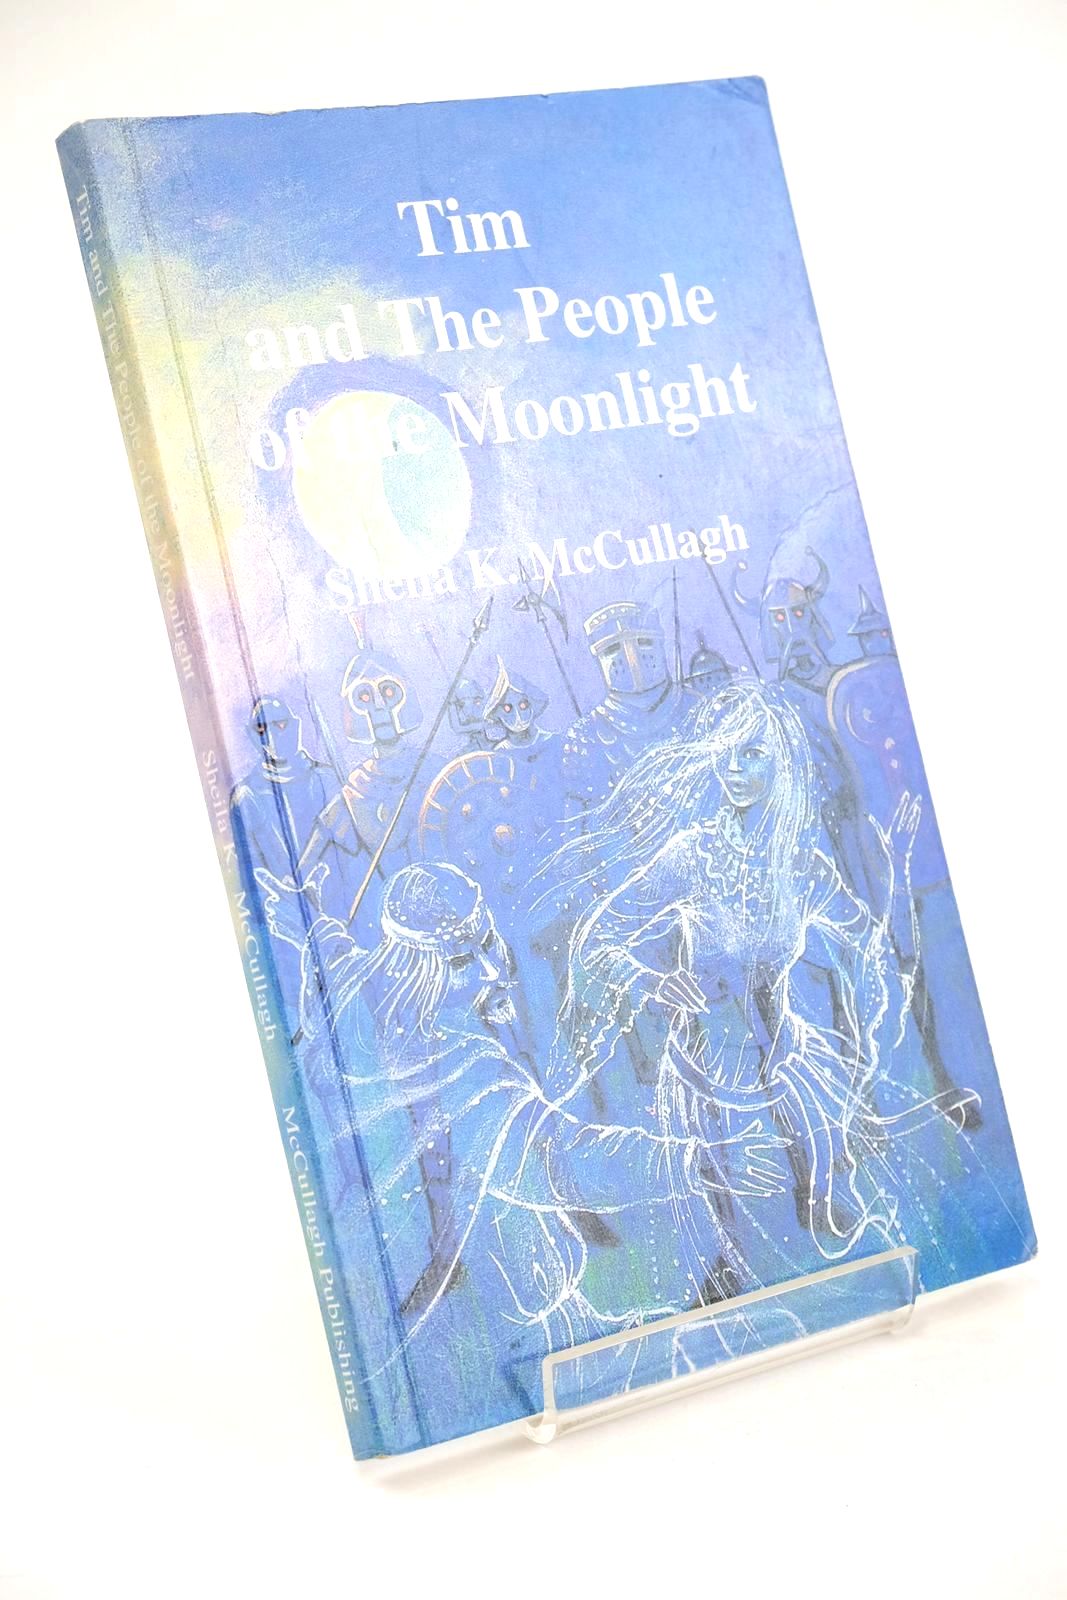 Photo of TIM AND THE PEOPLE OF THE MOONLIGHT written by McCullagh, Sheila K. illustrated by Mutimer, Ray published by McCullagh Publishing (STOCK CODE: 1323992)  for sale by Stella & Rose's Books